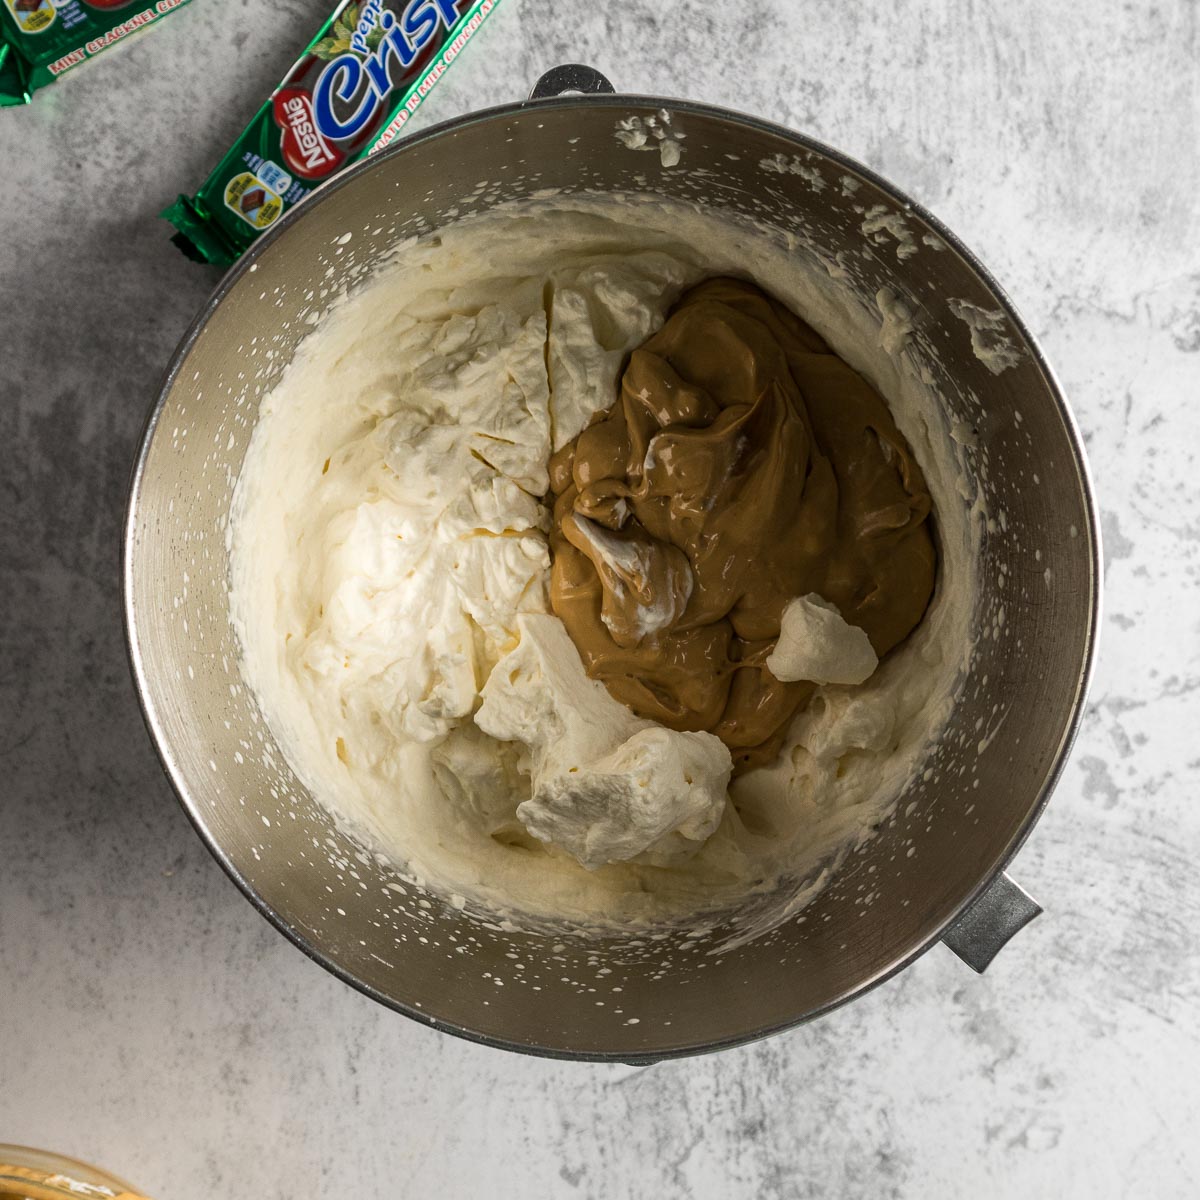 Add caramel to whipped cream